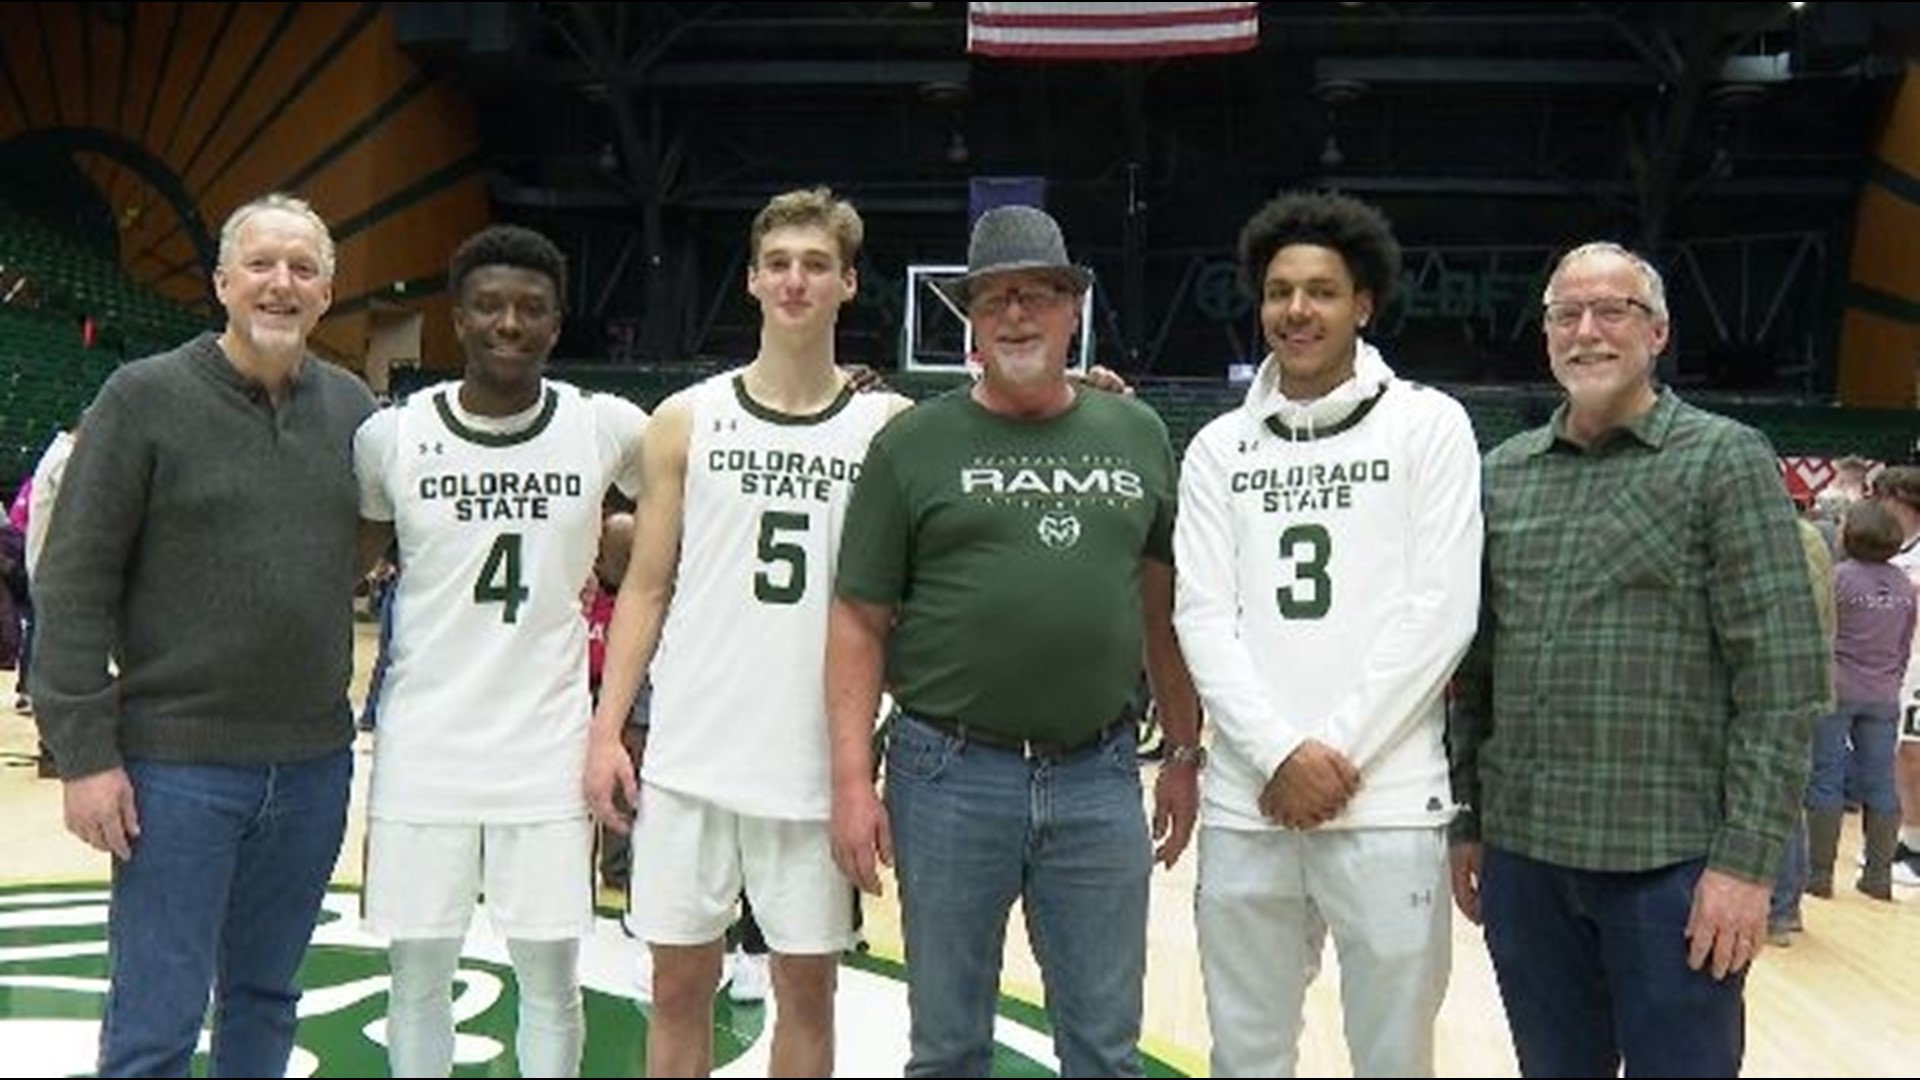 Stevens, a senior point guard with the Colorado State Rams, has two parents who battled cancer. The annual Fight Like A Ram game means a lot to him and his family.